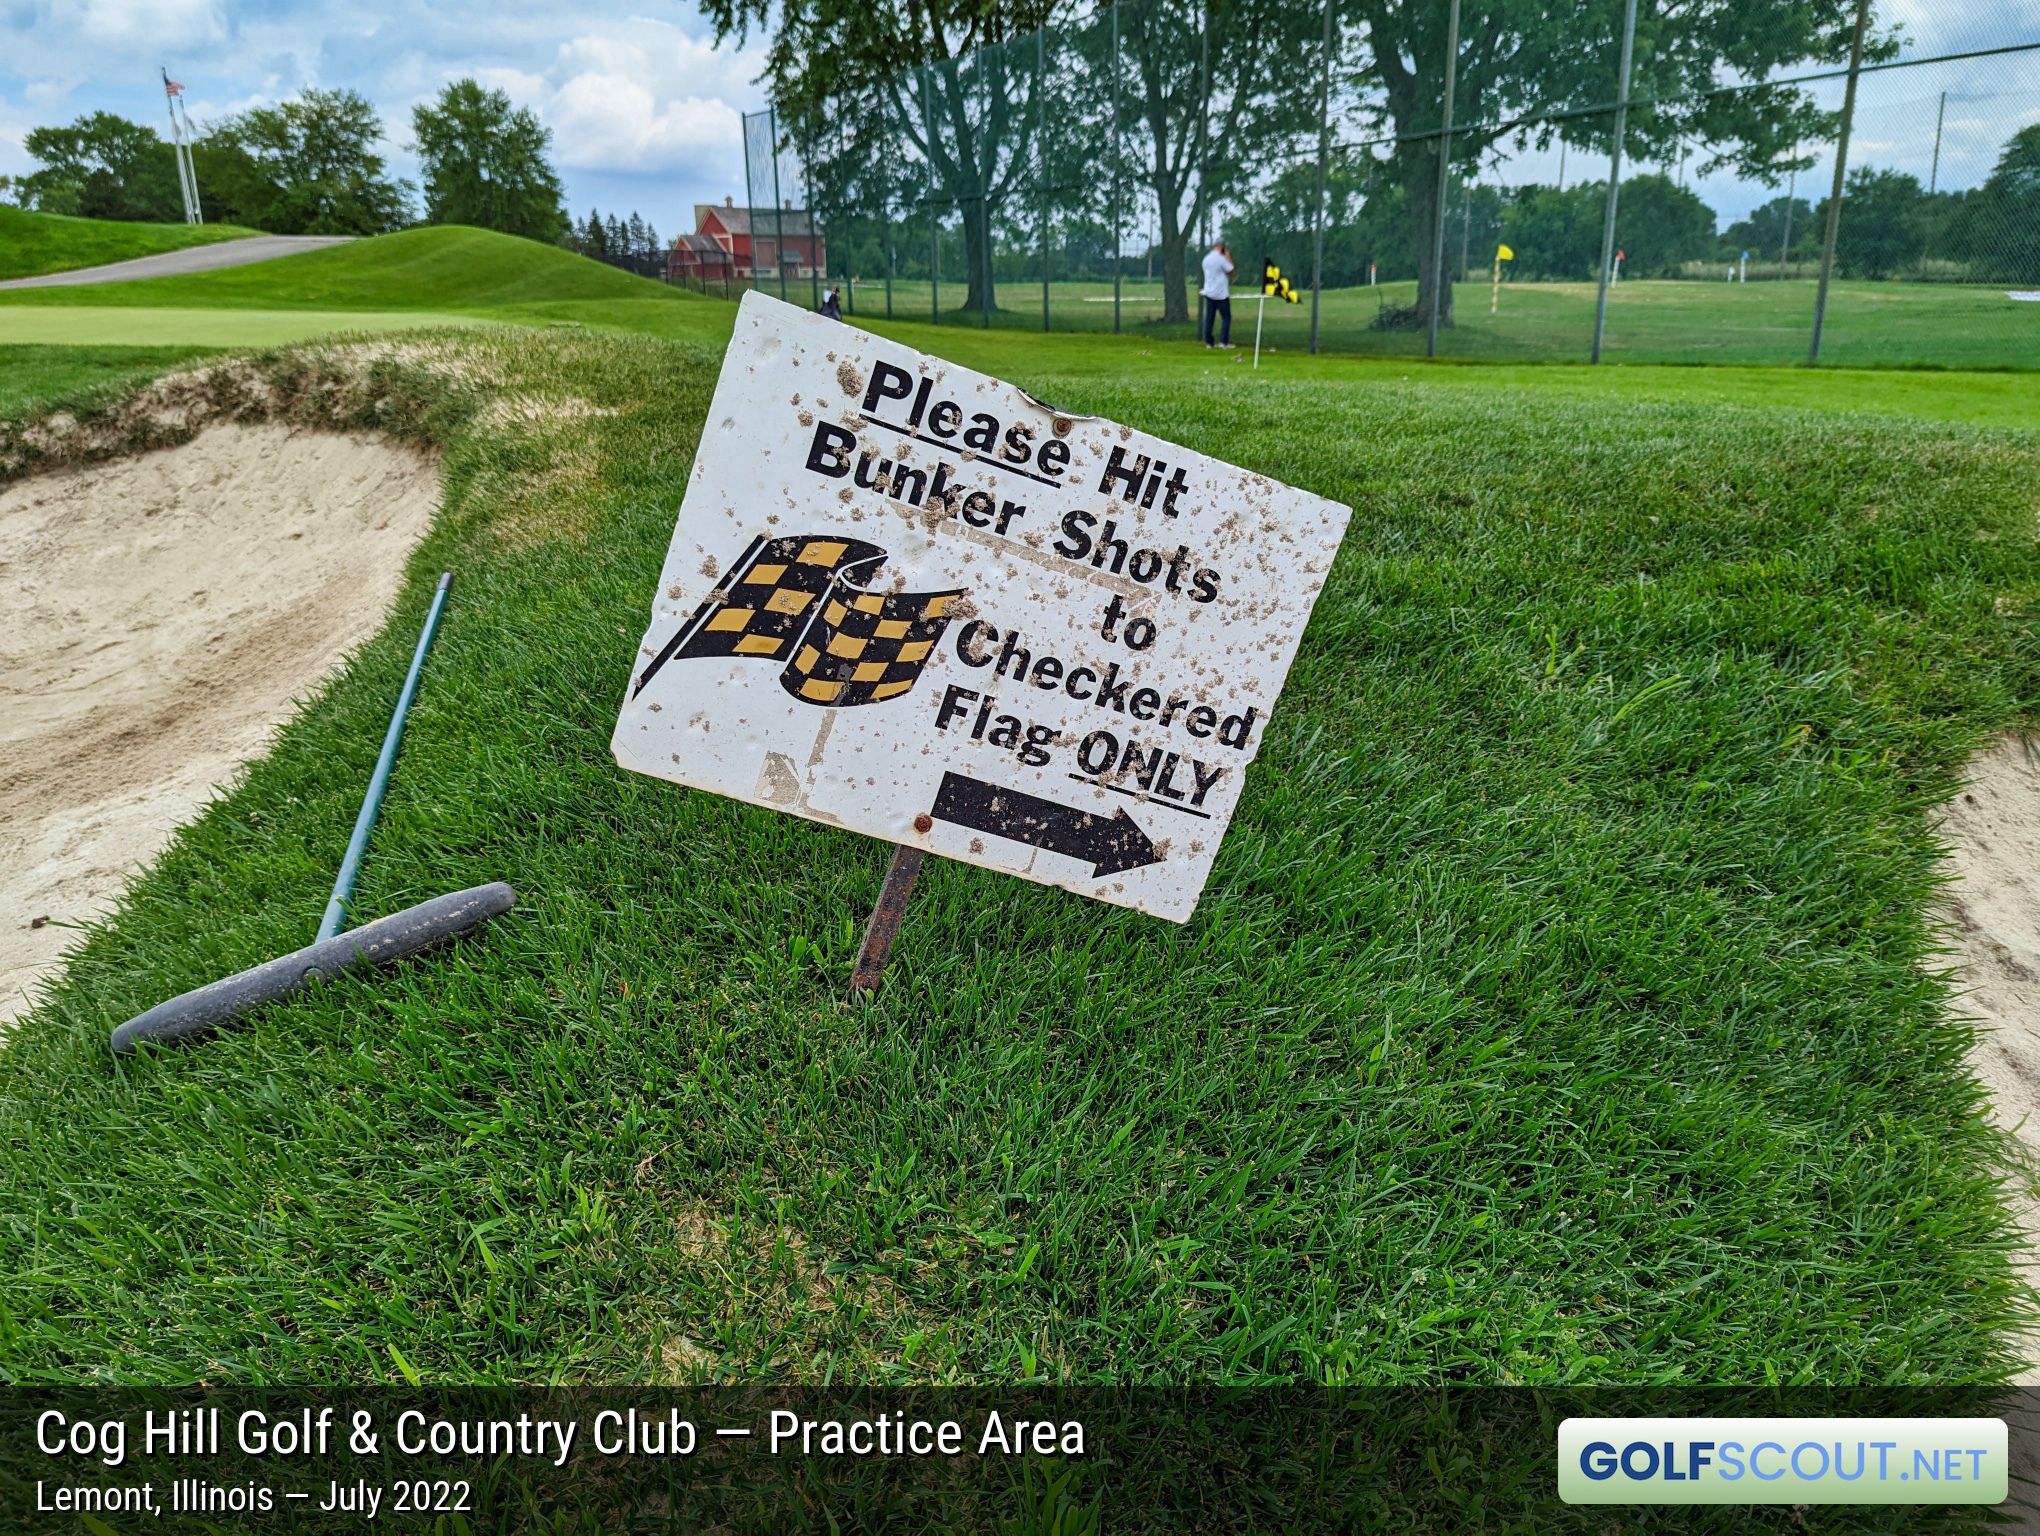 Photo of the practice area at Cog Hill Course #2 - Ravines in Lemont, Illinois. "Please hit bunker shots to checkered flag ONLY"